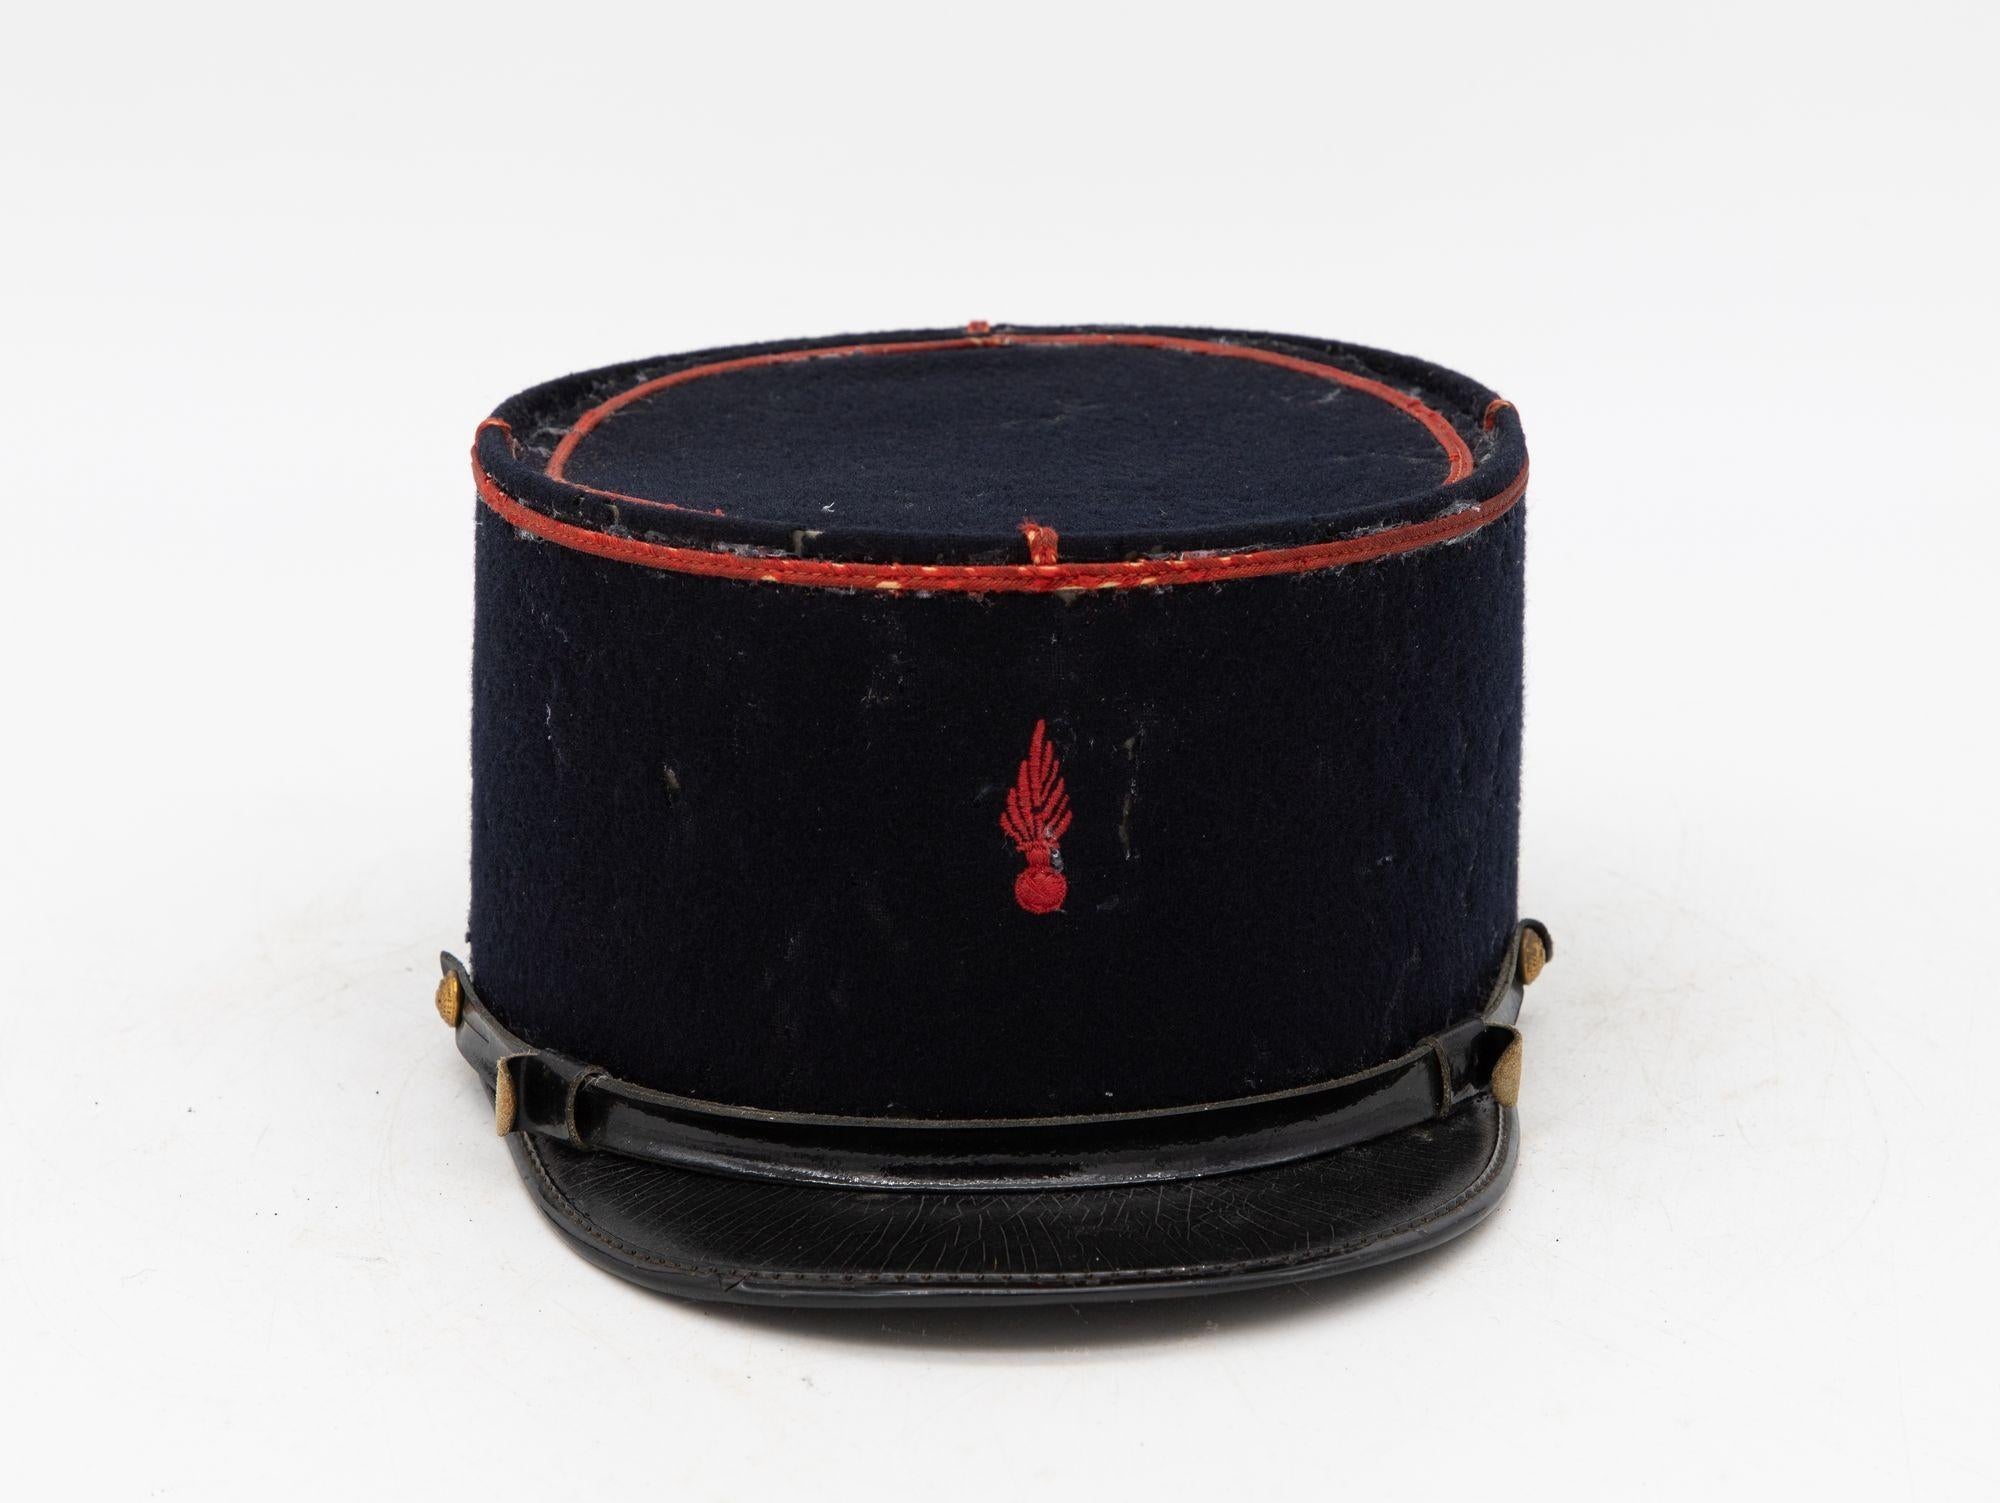 A rare French Military Academy Officer's hat or cap from the 1970s. These special and unique hats are part of the uniform of students studying to become officers in the French Military. This cap features a black leather brim on black felt with a red